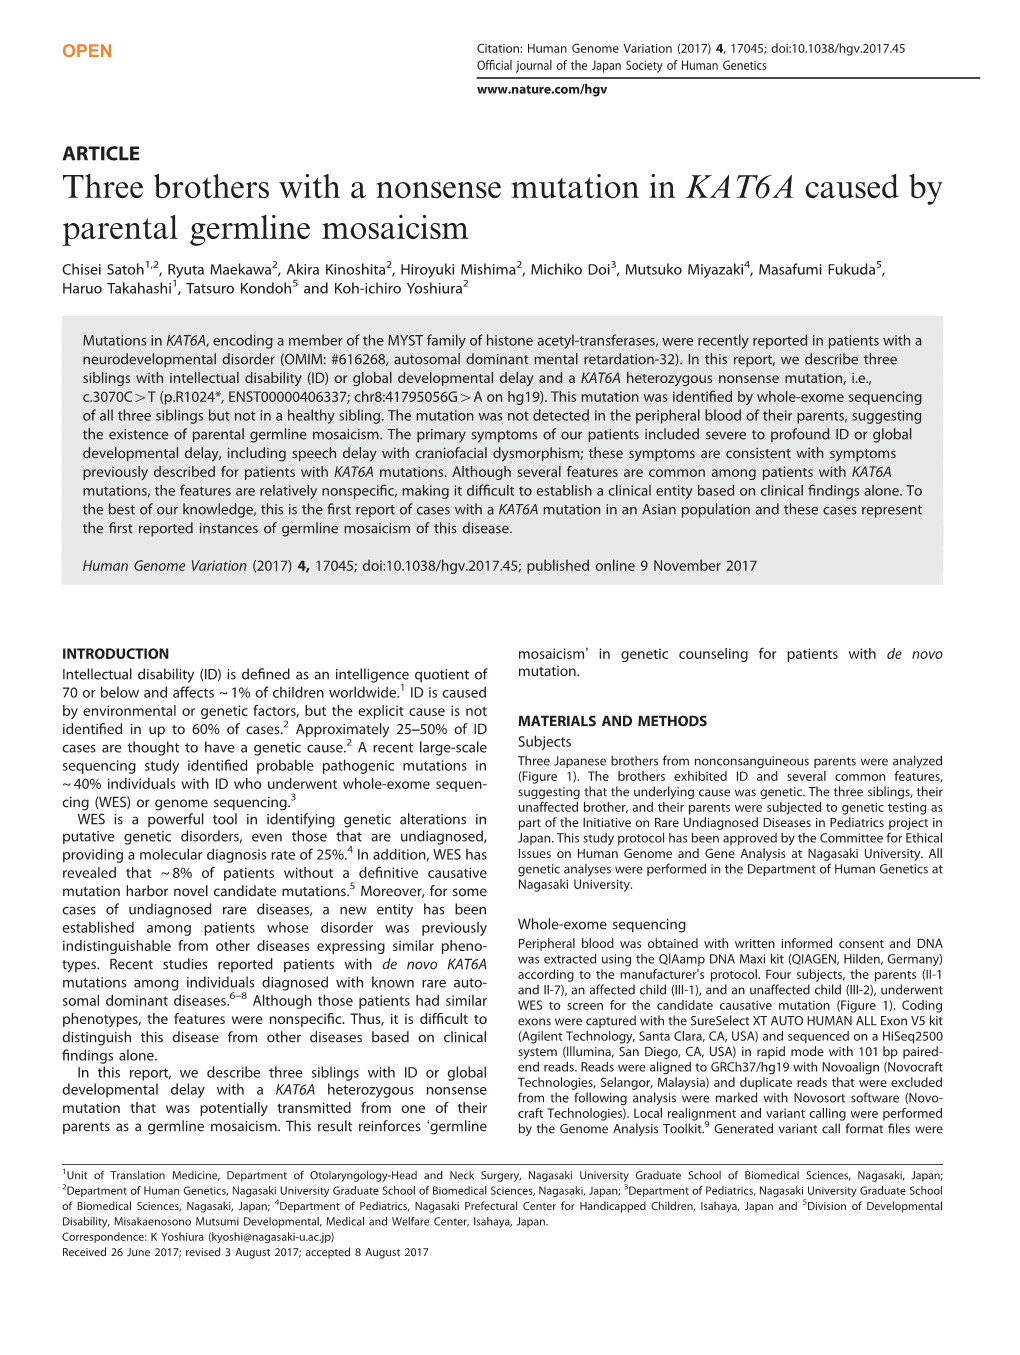 Three Brothers with a Nonsense Mutation in KAT6A Caused by Parental Germline Mosaicism